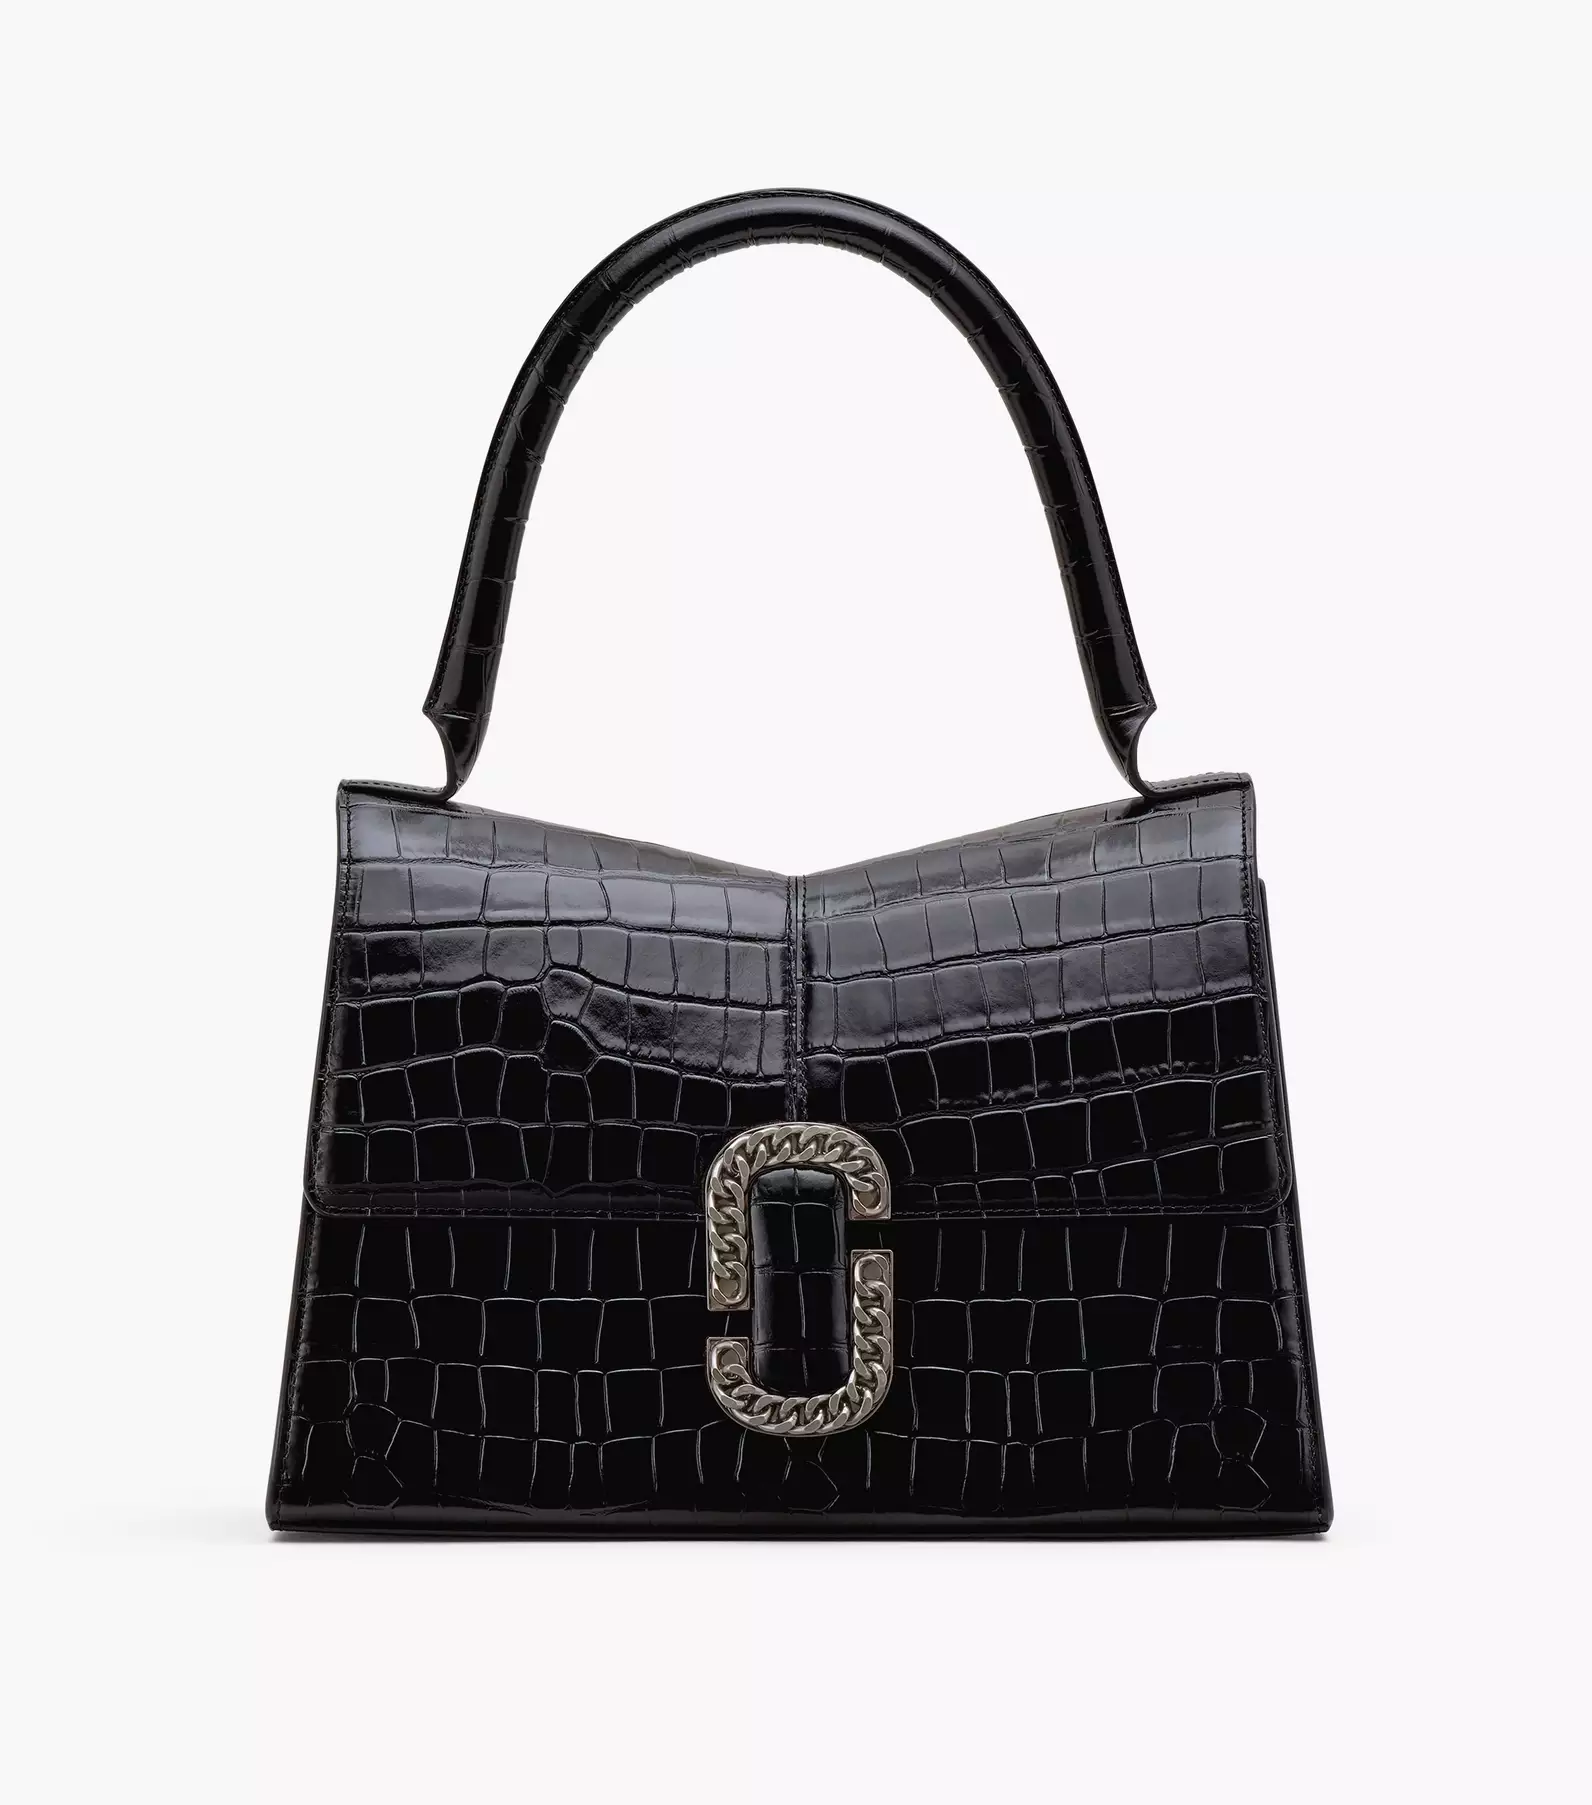 Marc Jacobs Re-Edition Quilted Leather Stam Bag Black